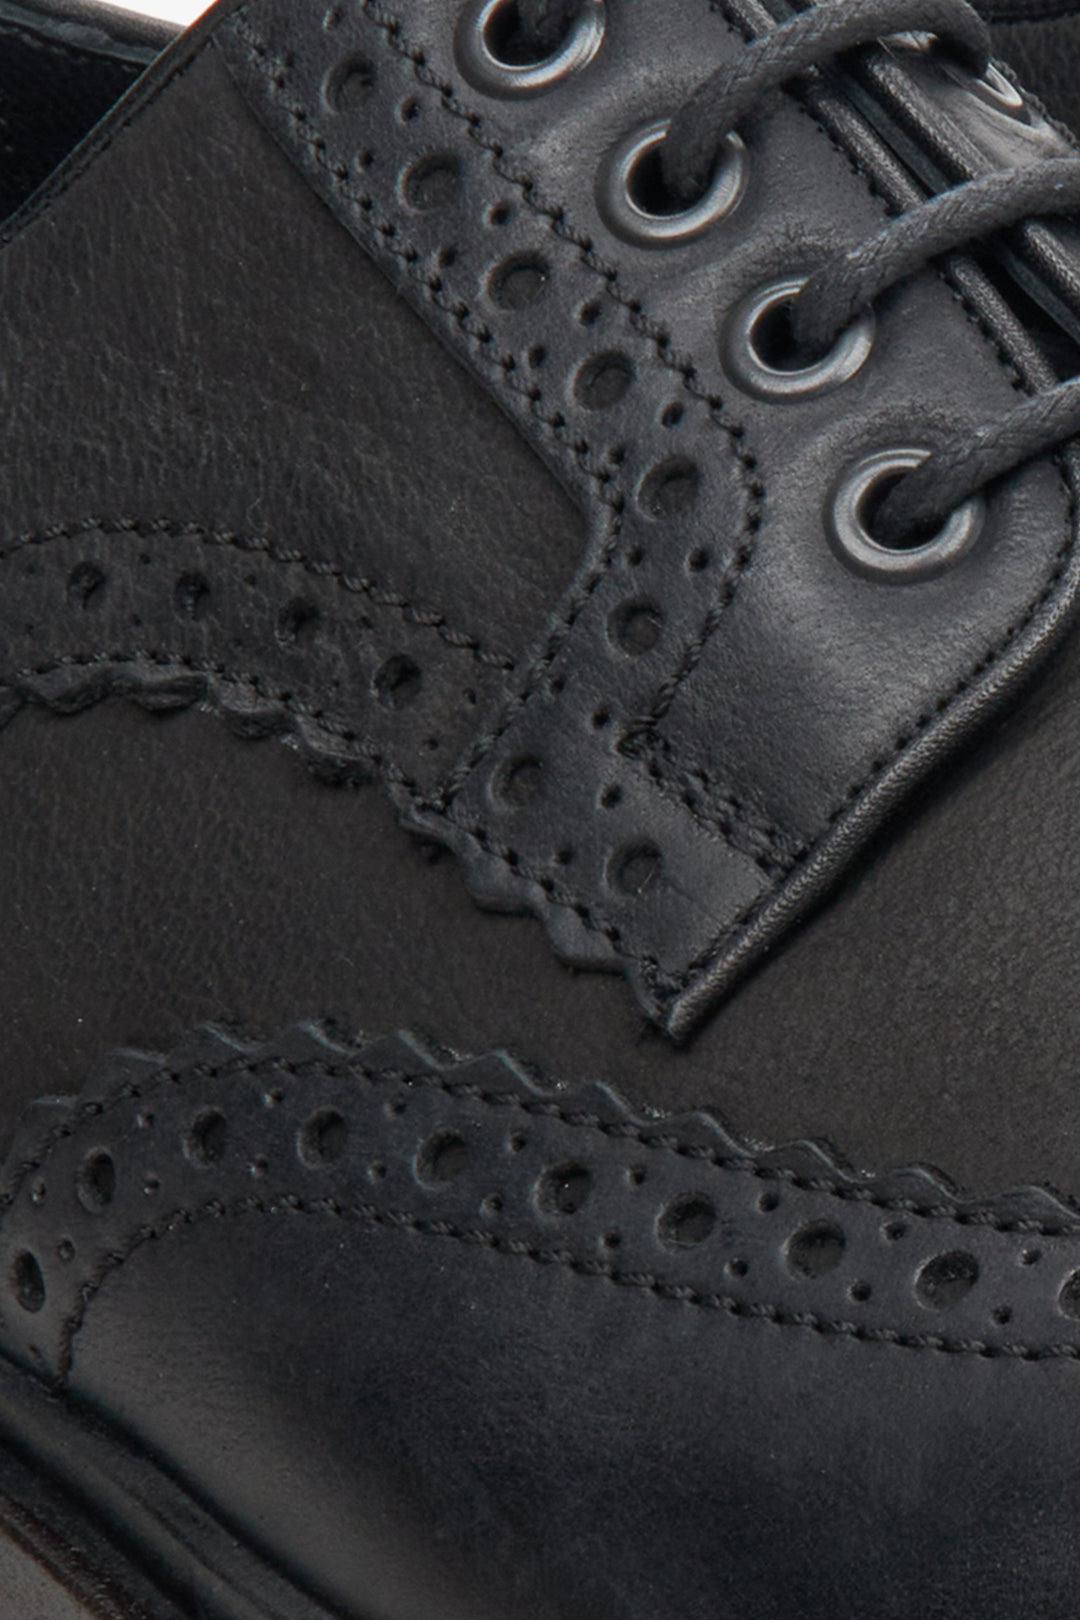 Men's black leather oxford shoes - close-up on the detail.